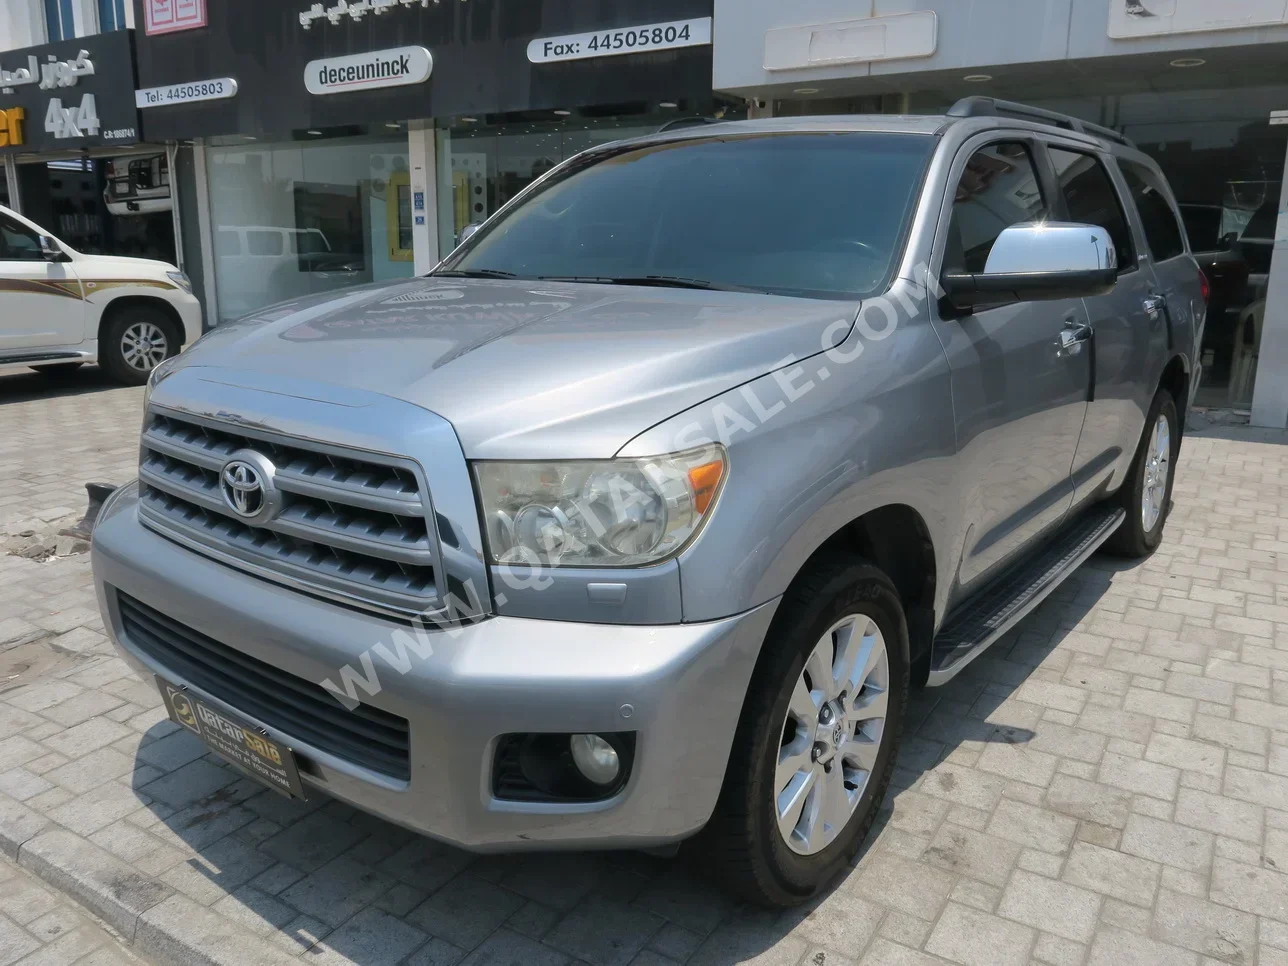 Toyota  Sequoia  Platinum  2009  Automatic  215,000 Km  8 Cylinder  Four Wheel Drive (4WD)  SUV  Gray